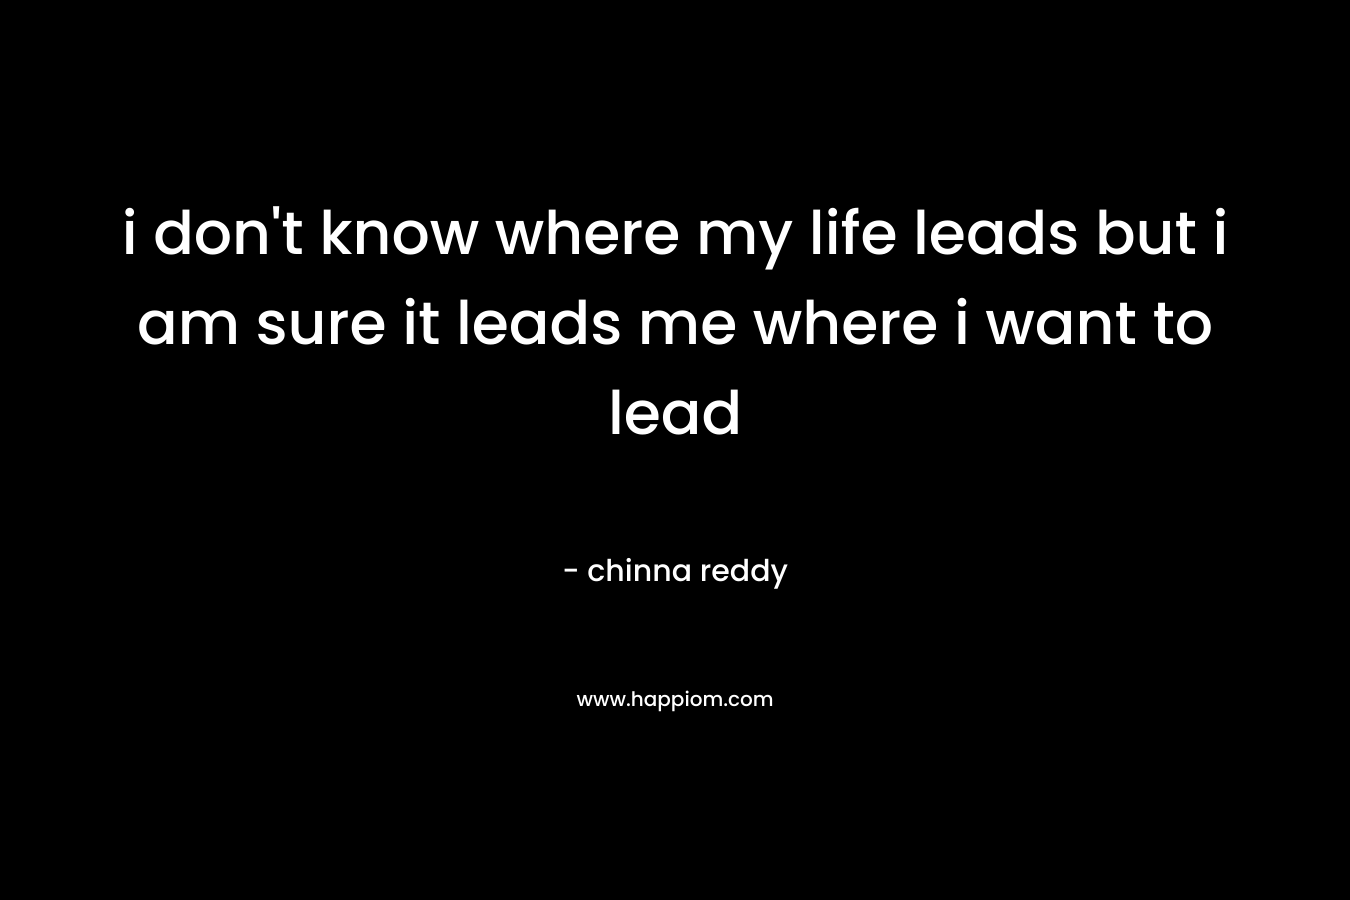 i don't know where my life leads but i am sure it leads me where i want to lead